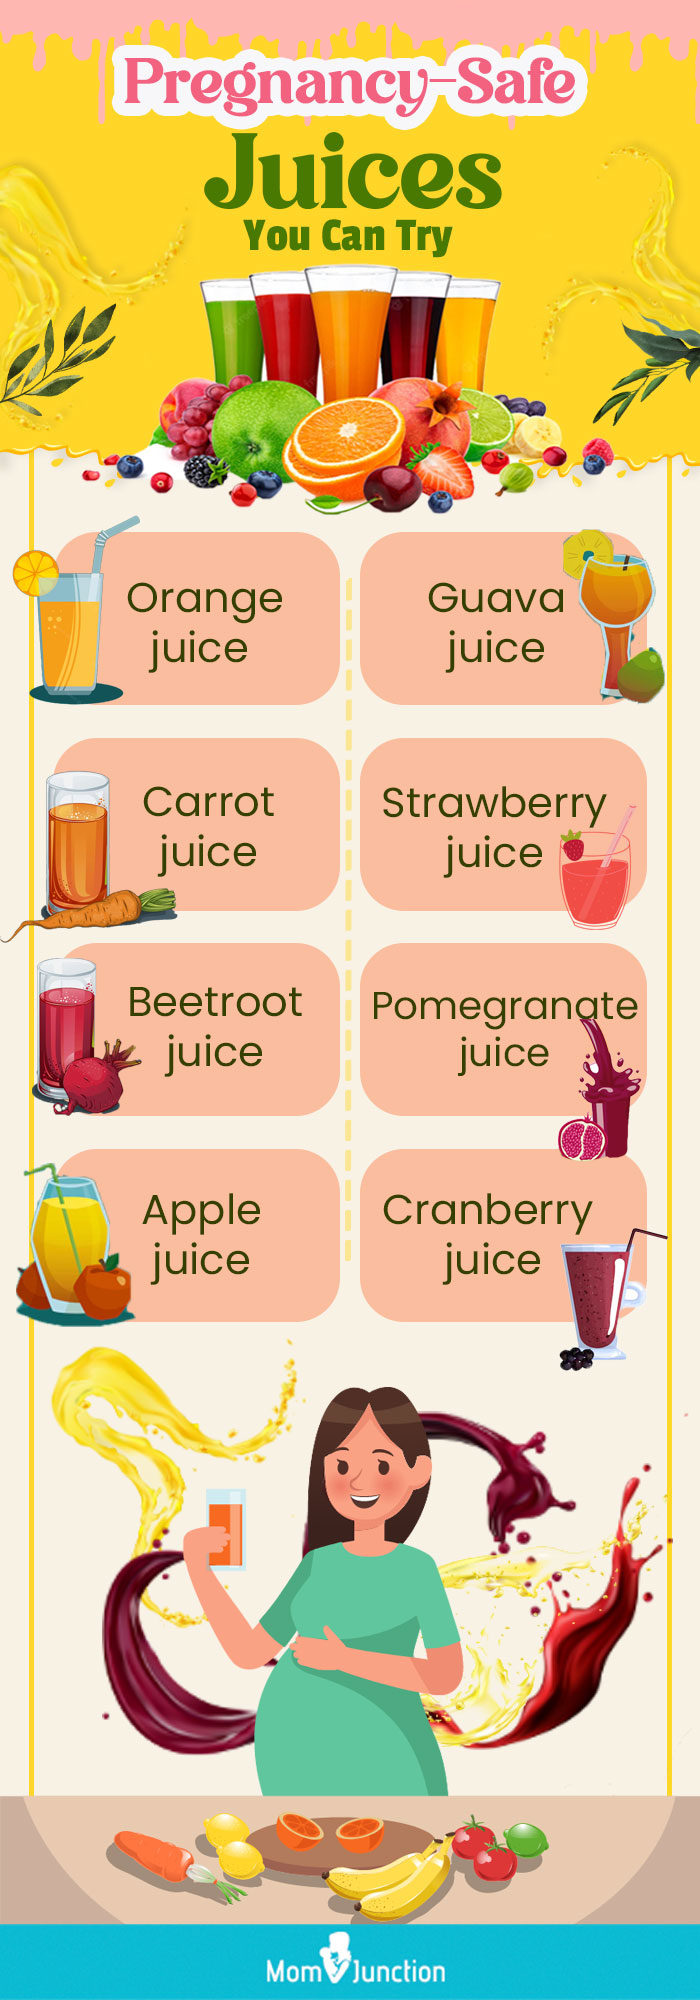 pregnancy safe juices you can try [infographic]